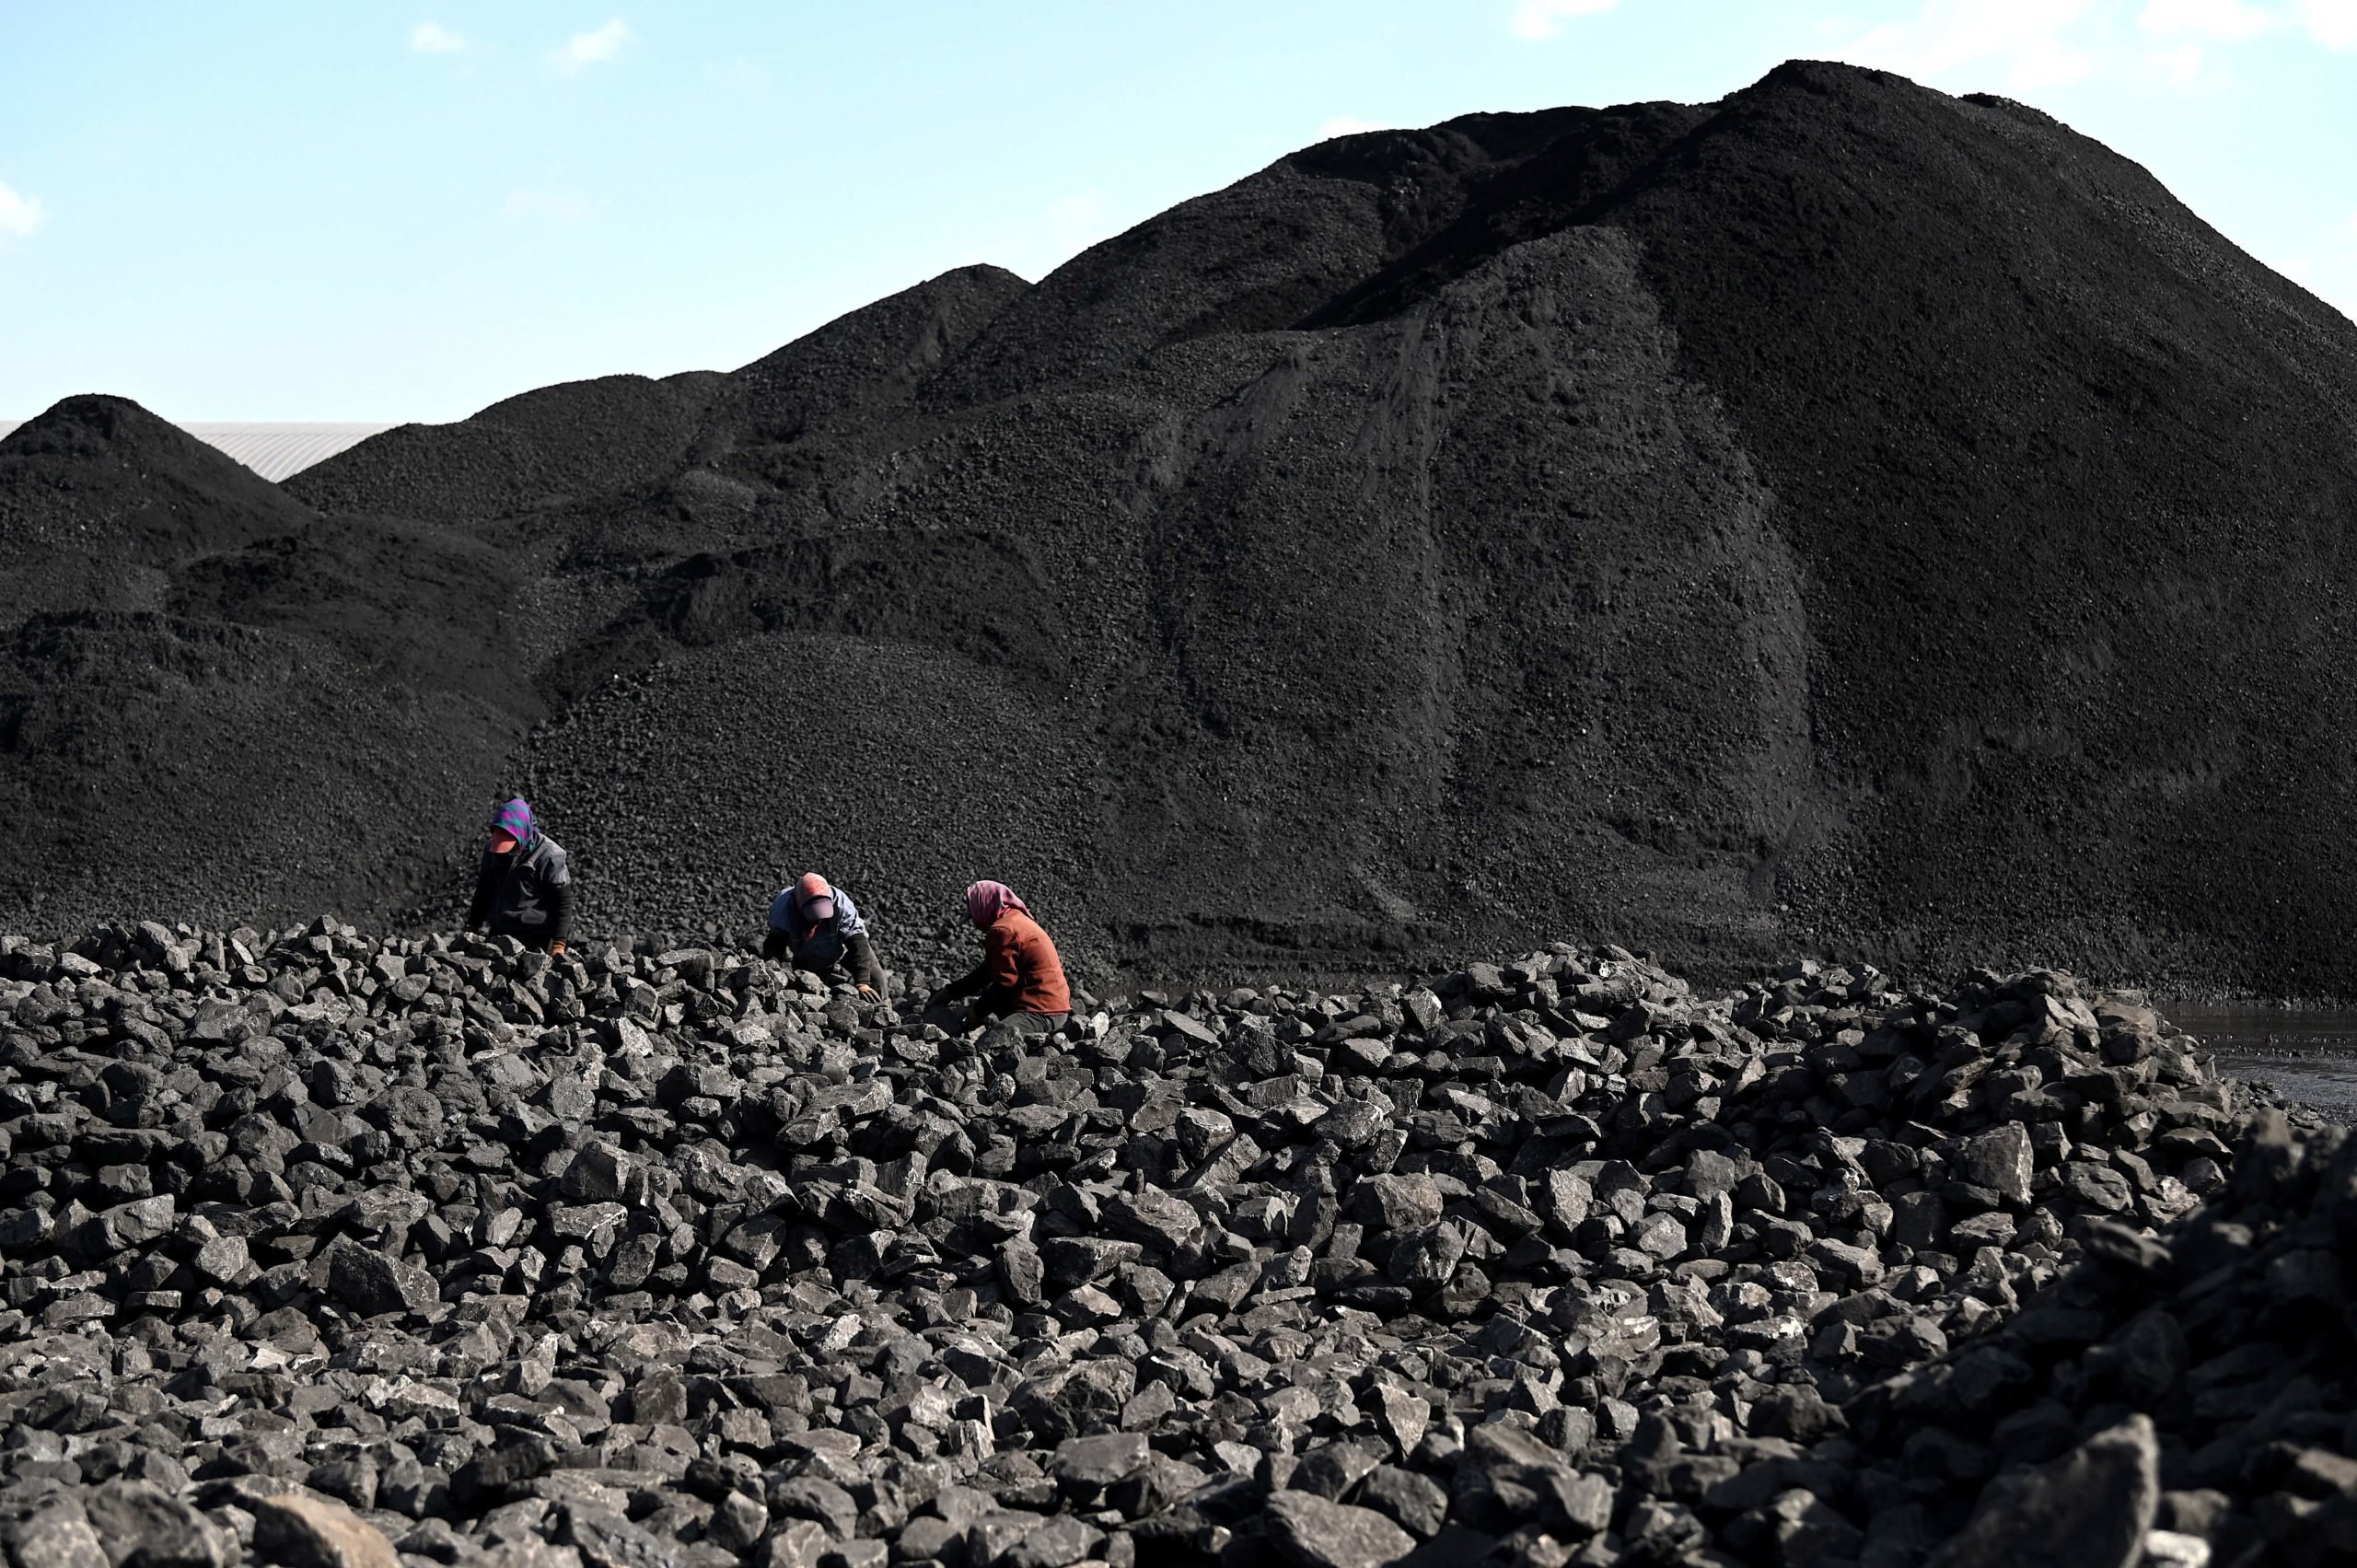 Workers sort coal near a coal mine in Datong, China's northern Shanxi province on Nov. 3. (Noel Celis/AFP via Getty Images)